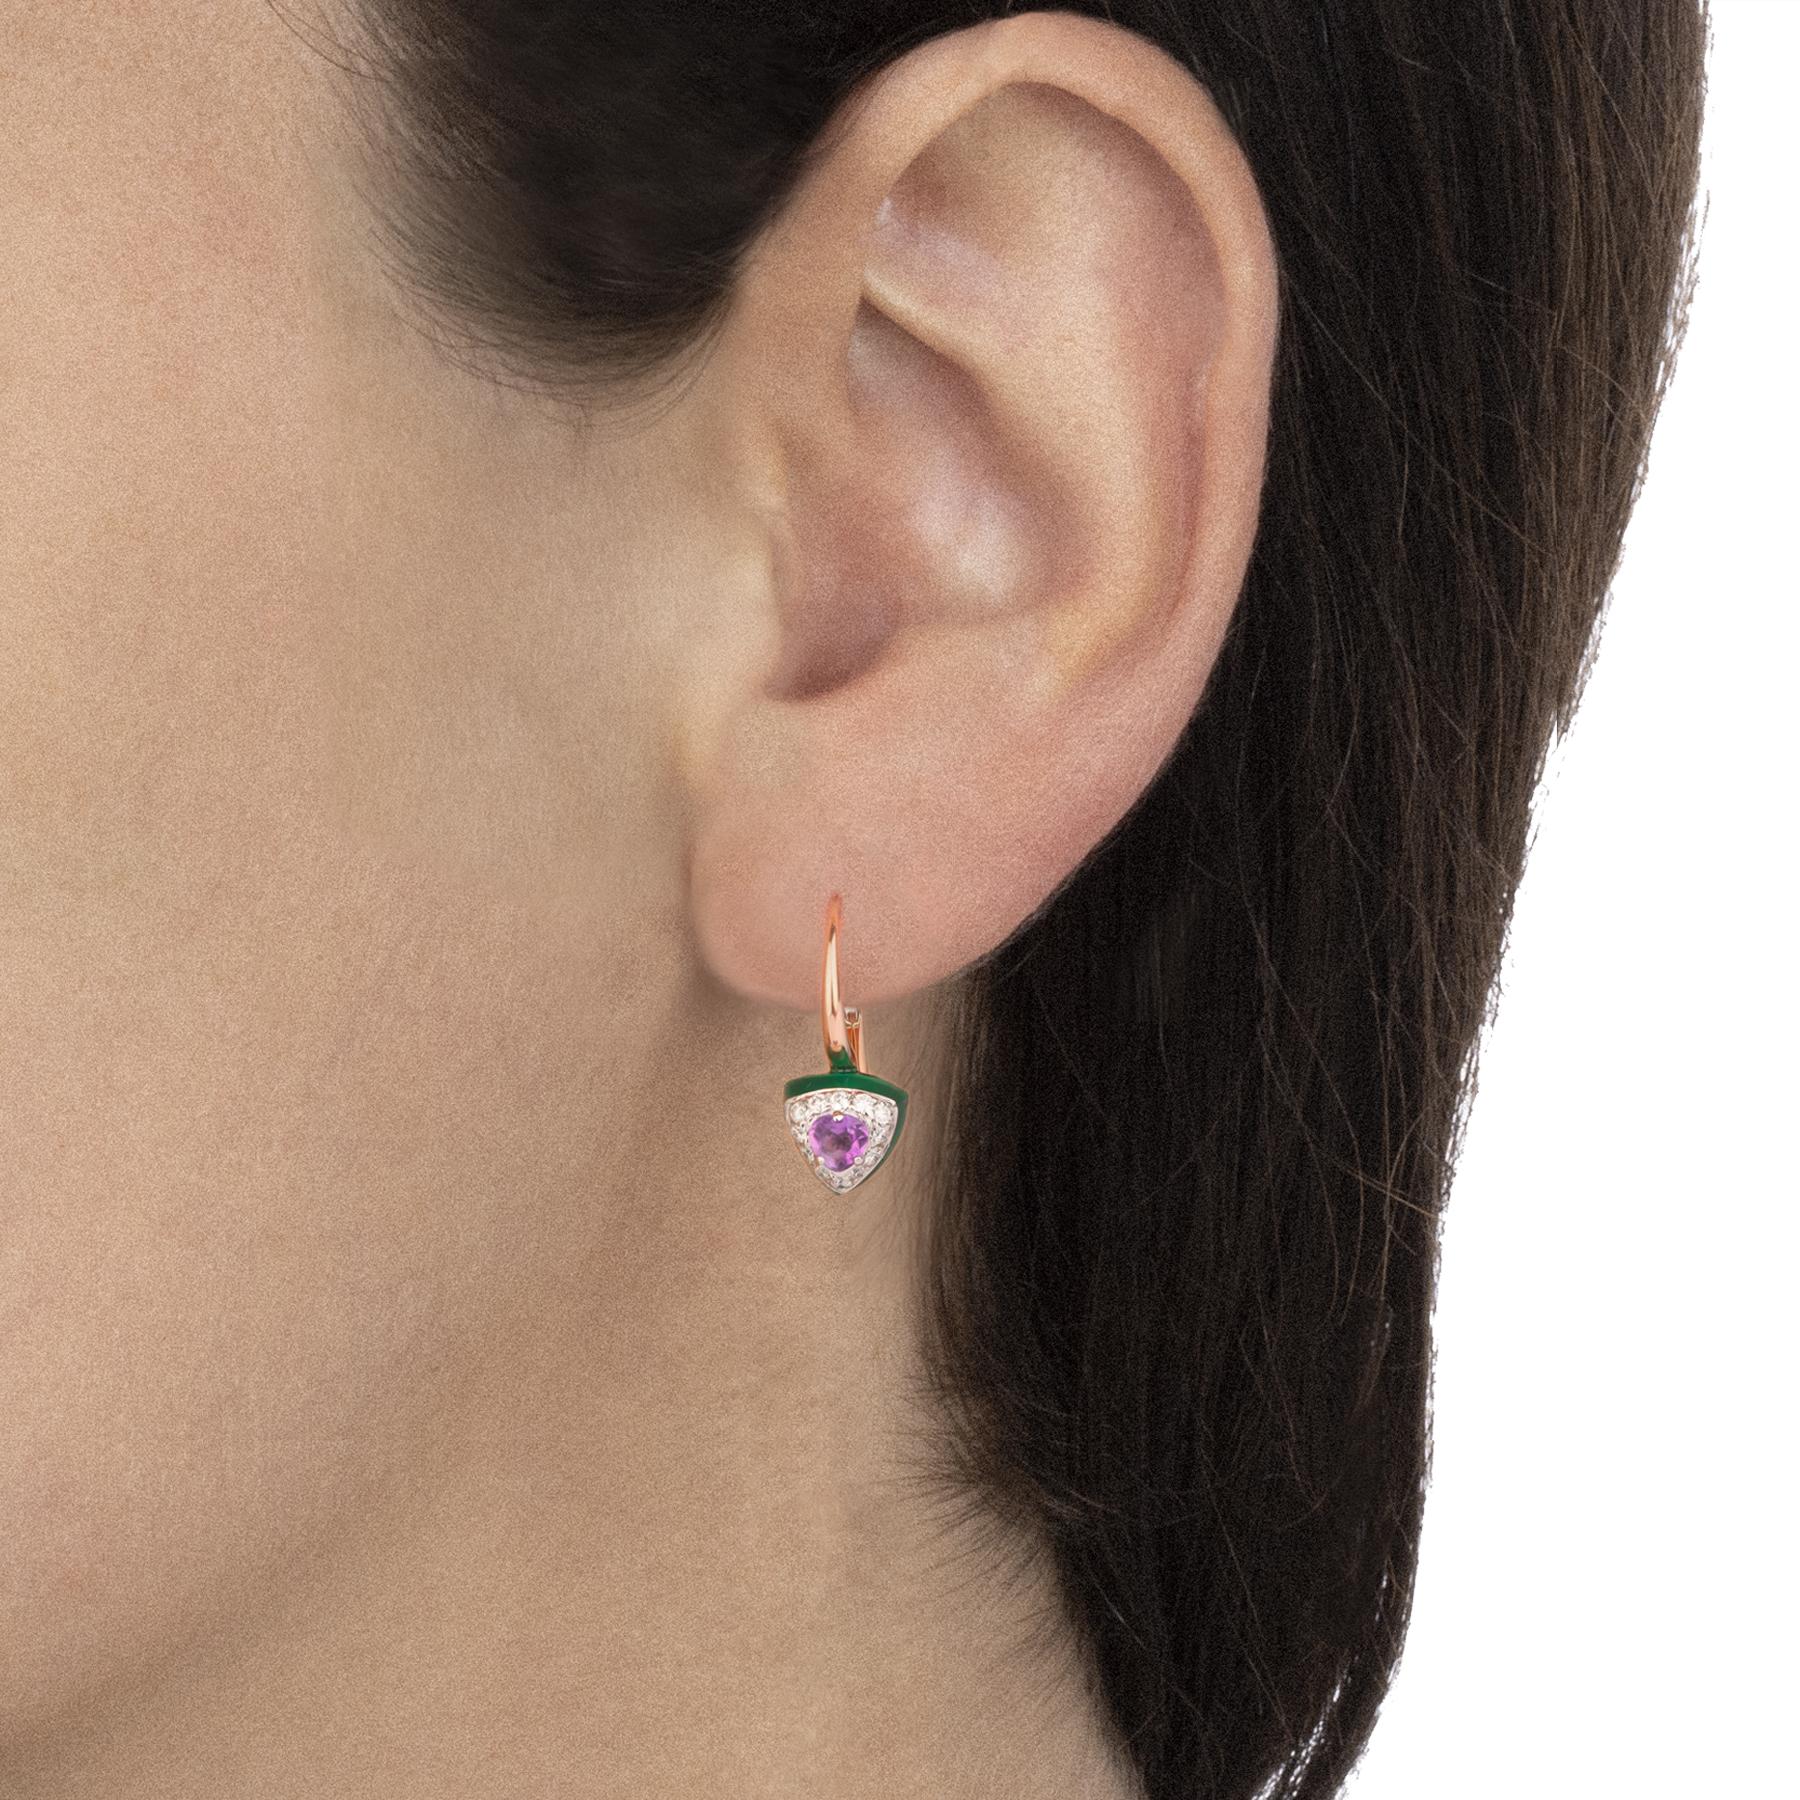 Green onyx and amethyst for these earrings with an exotic color scheme. Lush green cushions topped by precious diamonds for a fun and elegant look.

Cast rose gold earrings, triangle cut green onyx 3.90 ct, diamonds pavé of 0.38 ct on white gold and